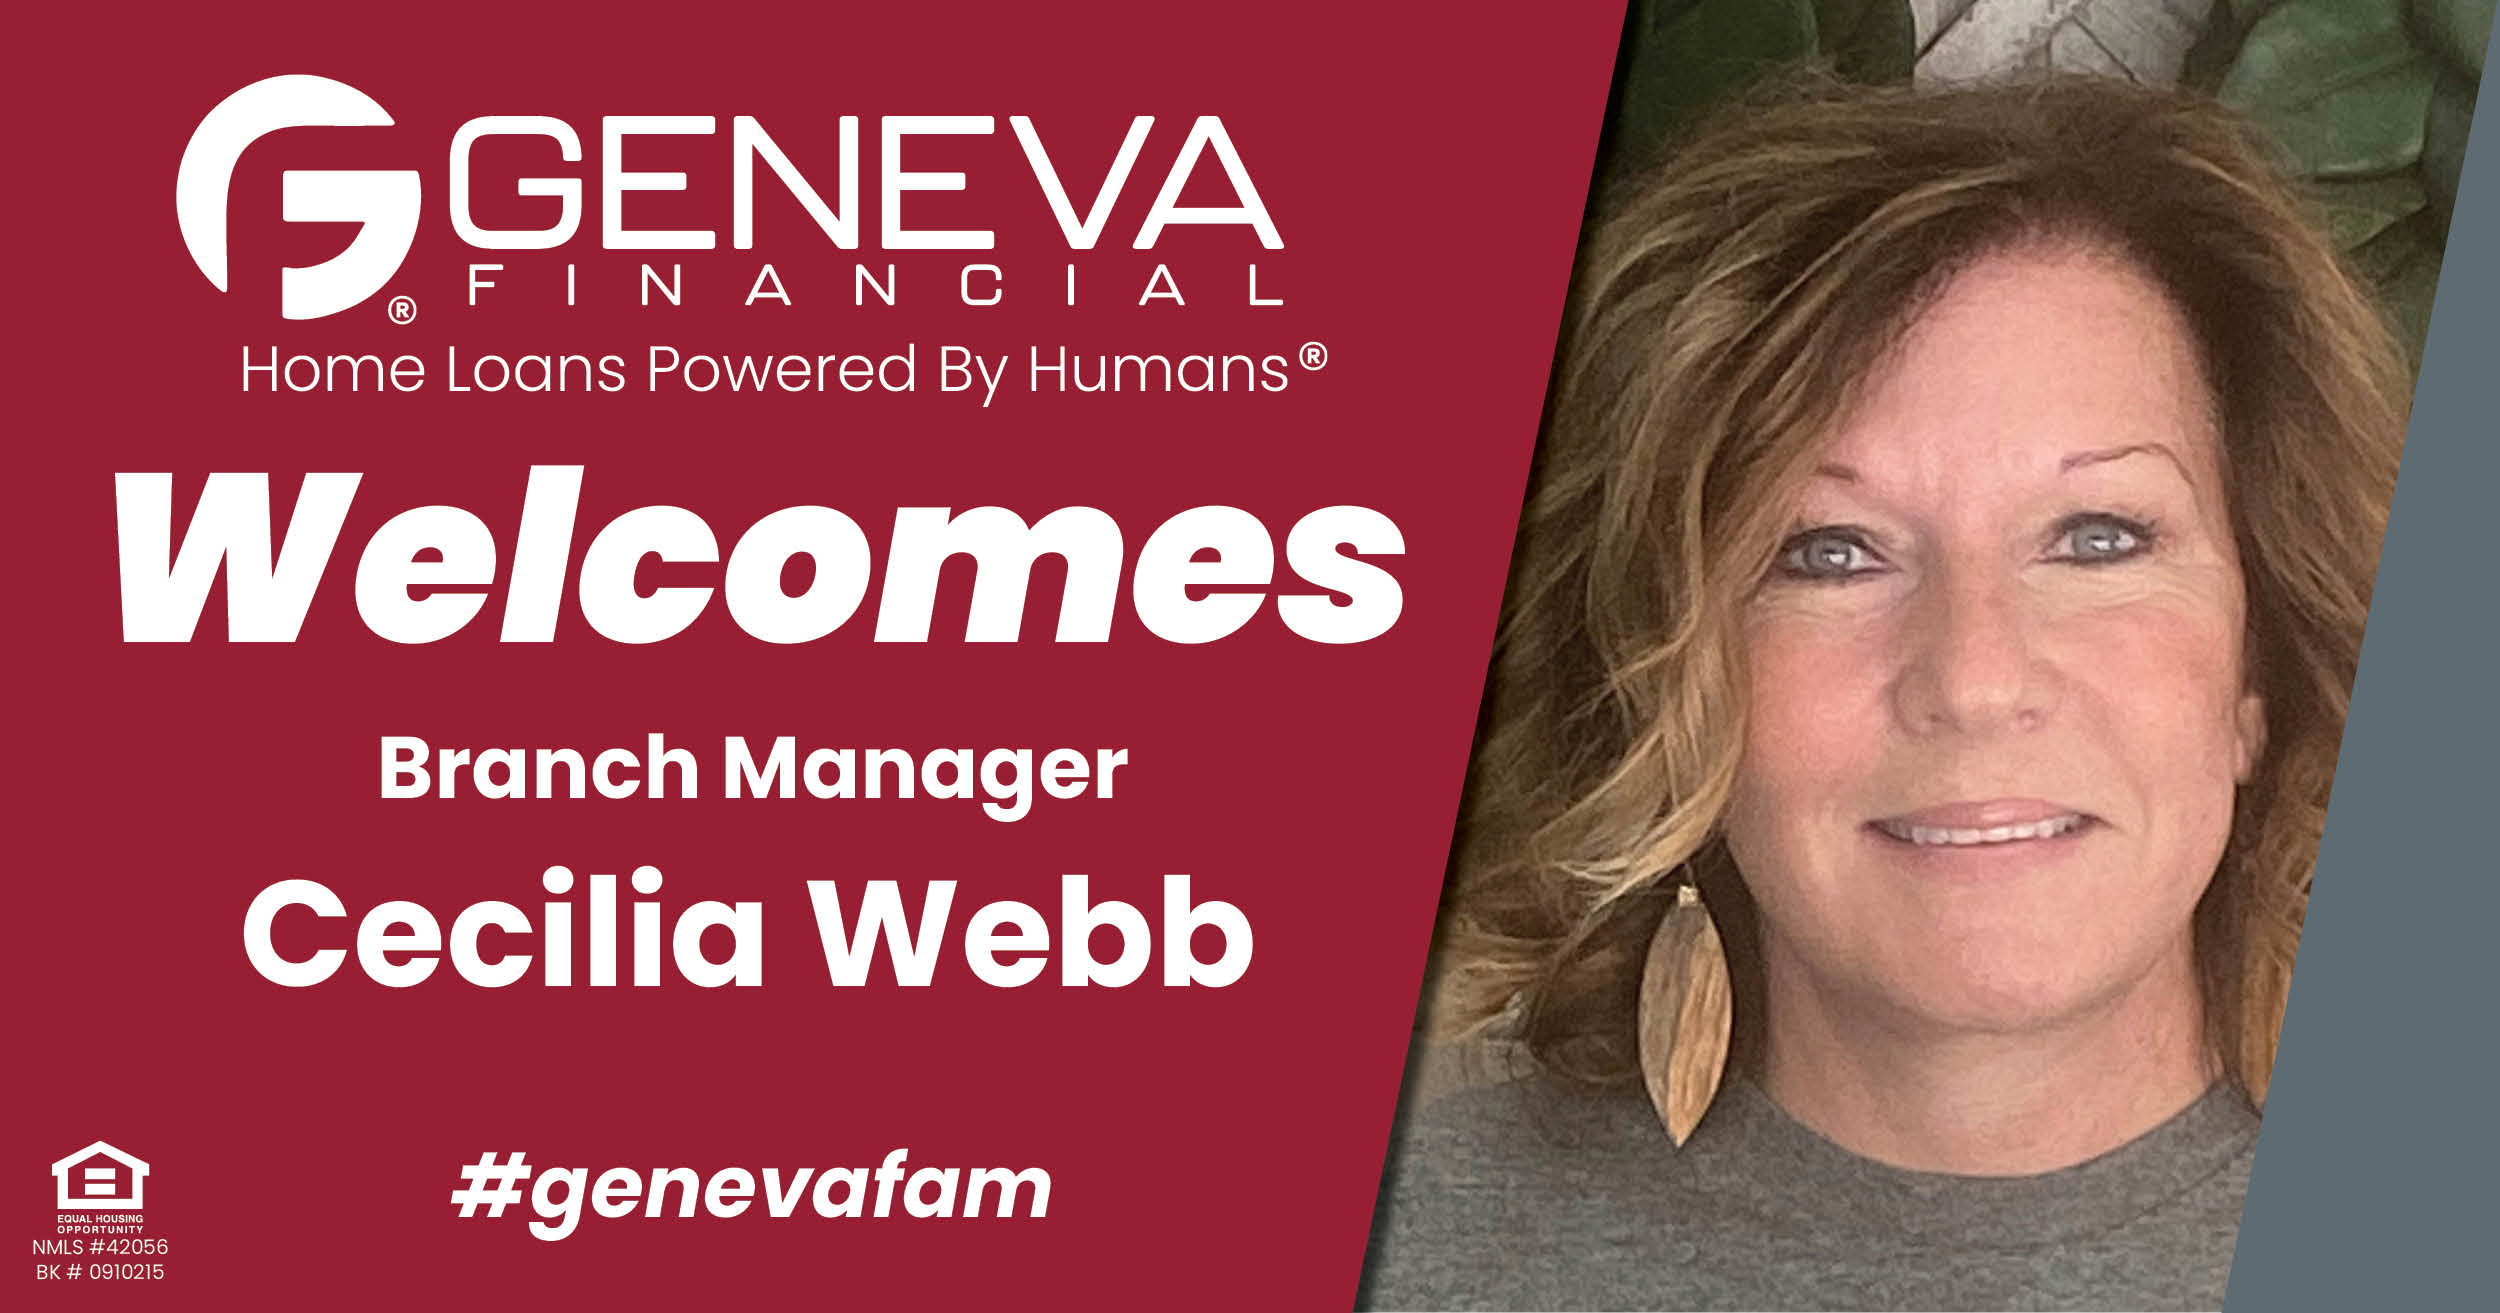 Geneva Financial Welcomes New Branch Manager Cecilia Webb to Palestine, TX – Home Loans Powered by Humans®.